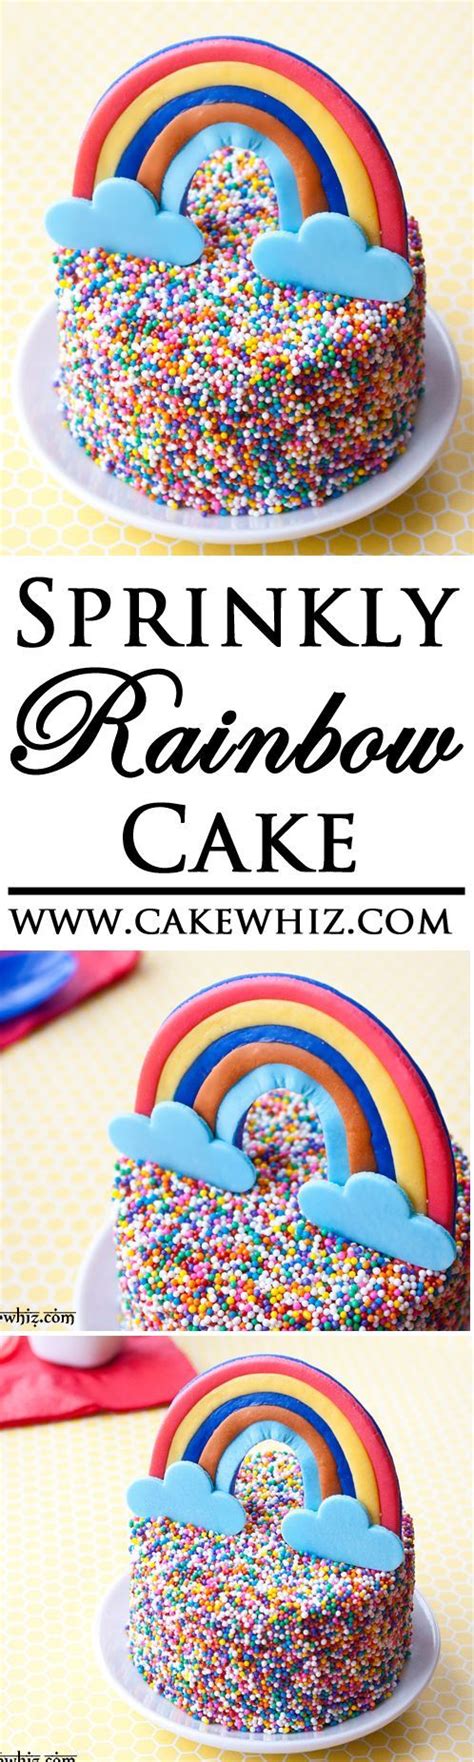 A Mini Rainbow Cake Covered In Colorful Sprinkles Fun For Kids Parties